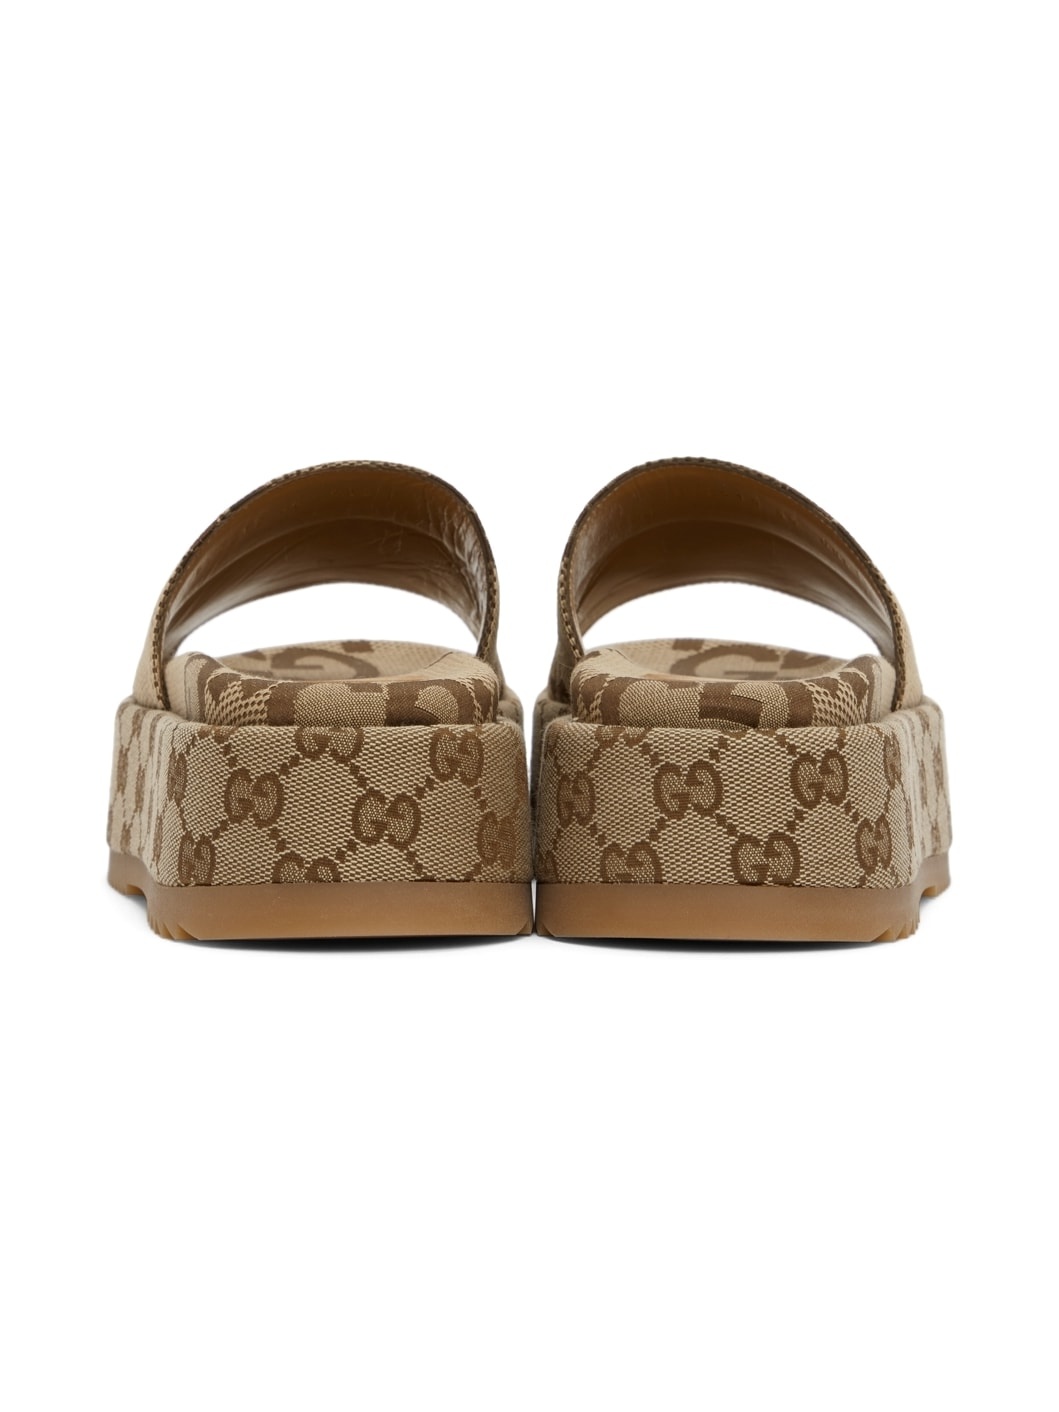 Brown GG Angelina Sandals - 4